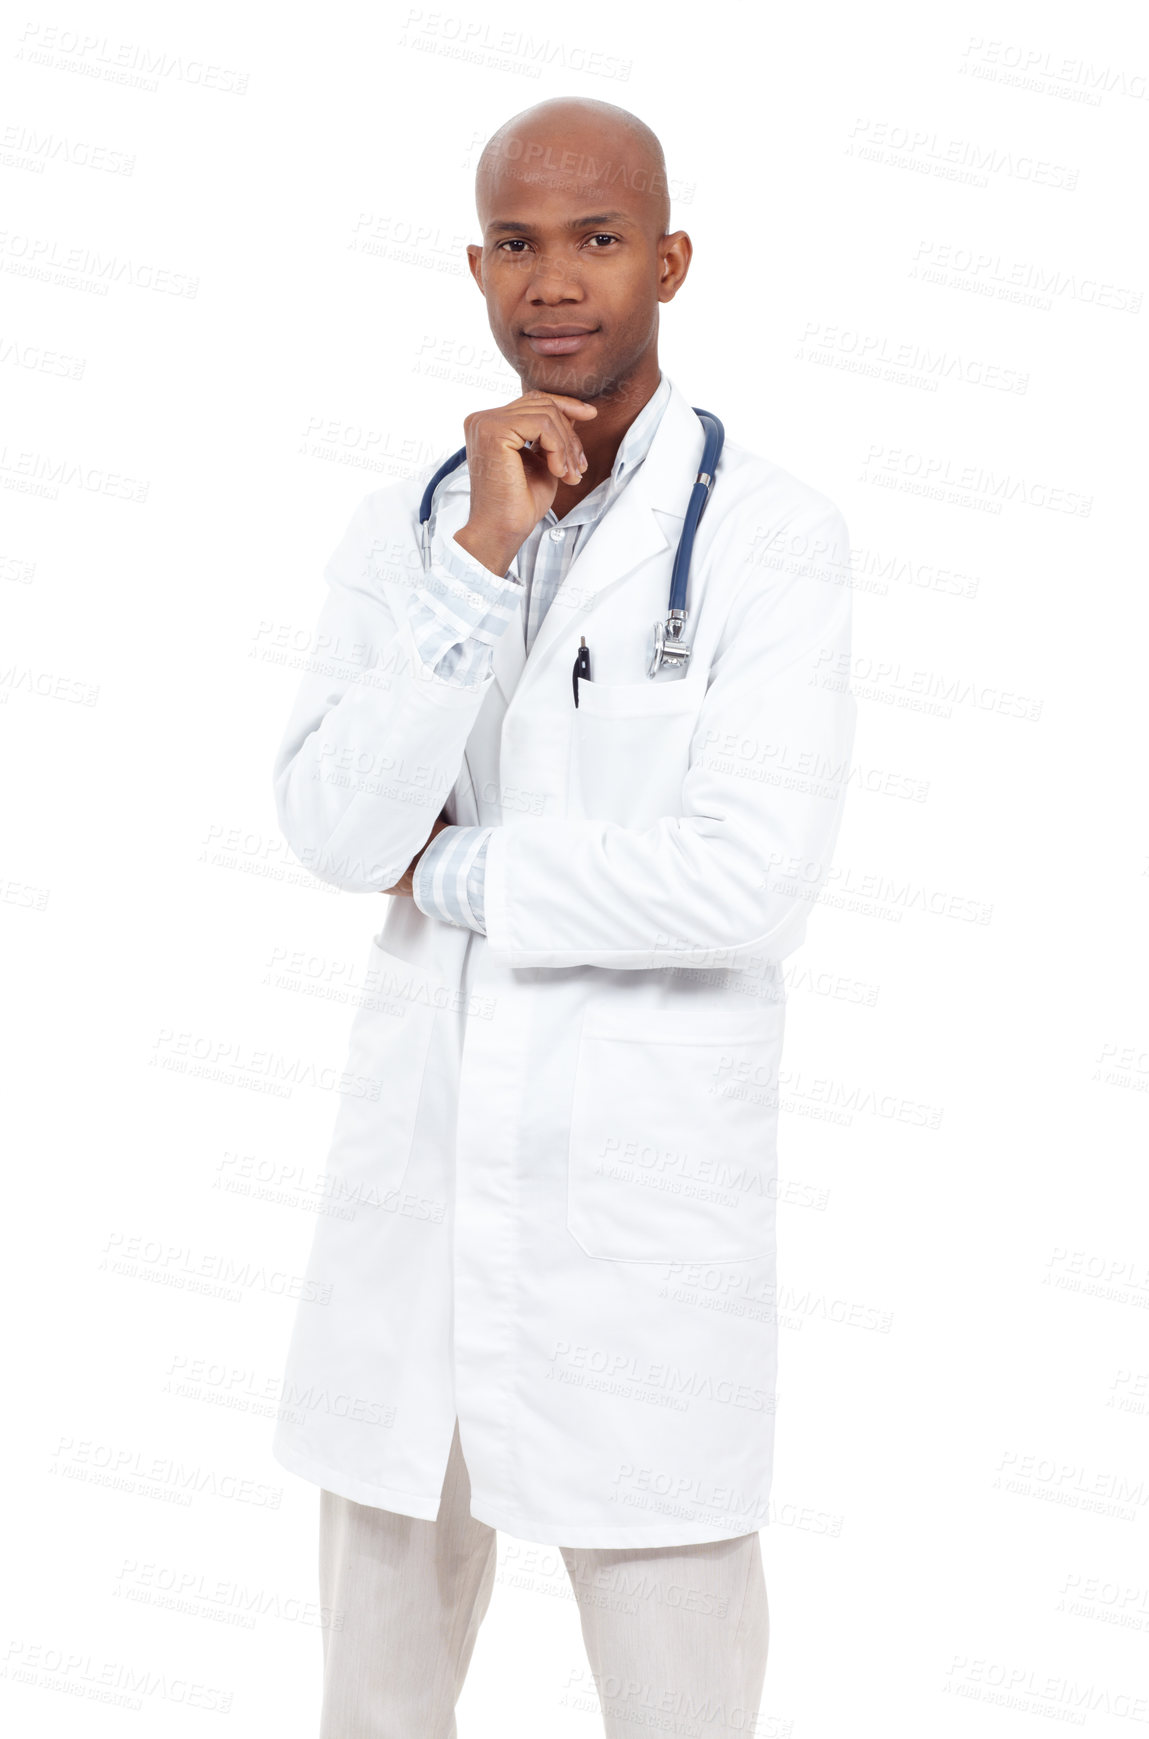 Buy stock photo Studio portrait of a young african american doctor looking thoughtful